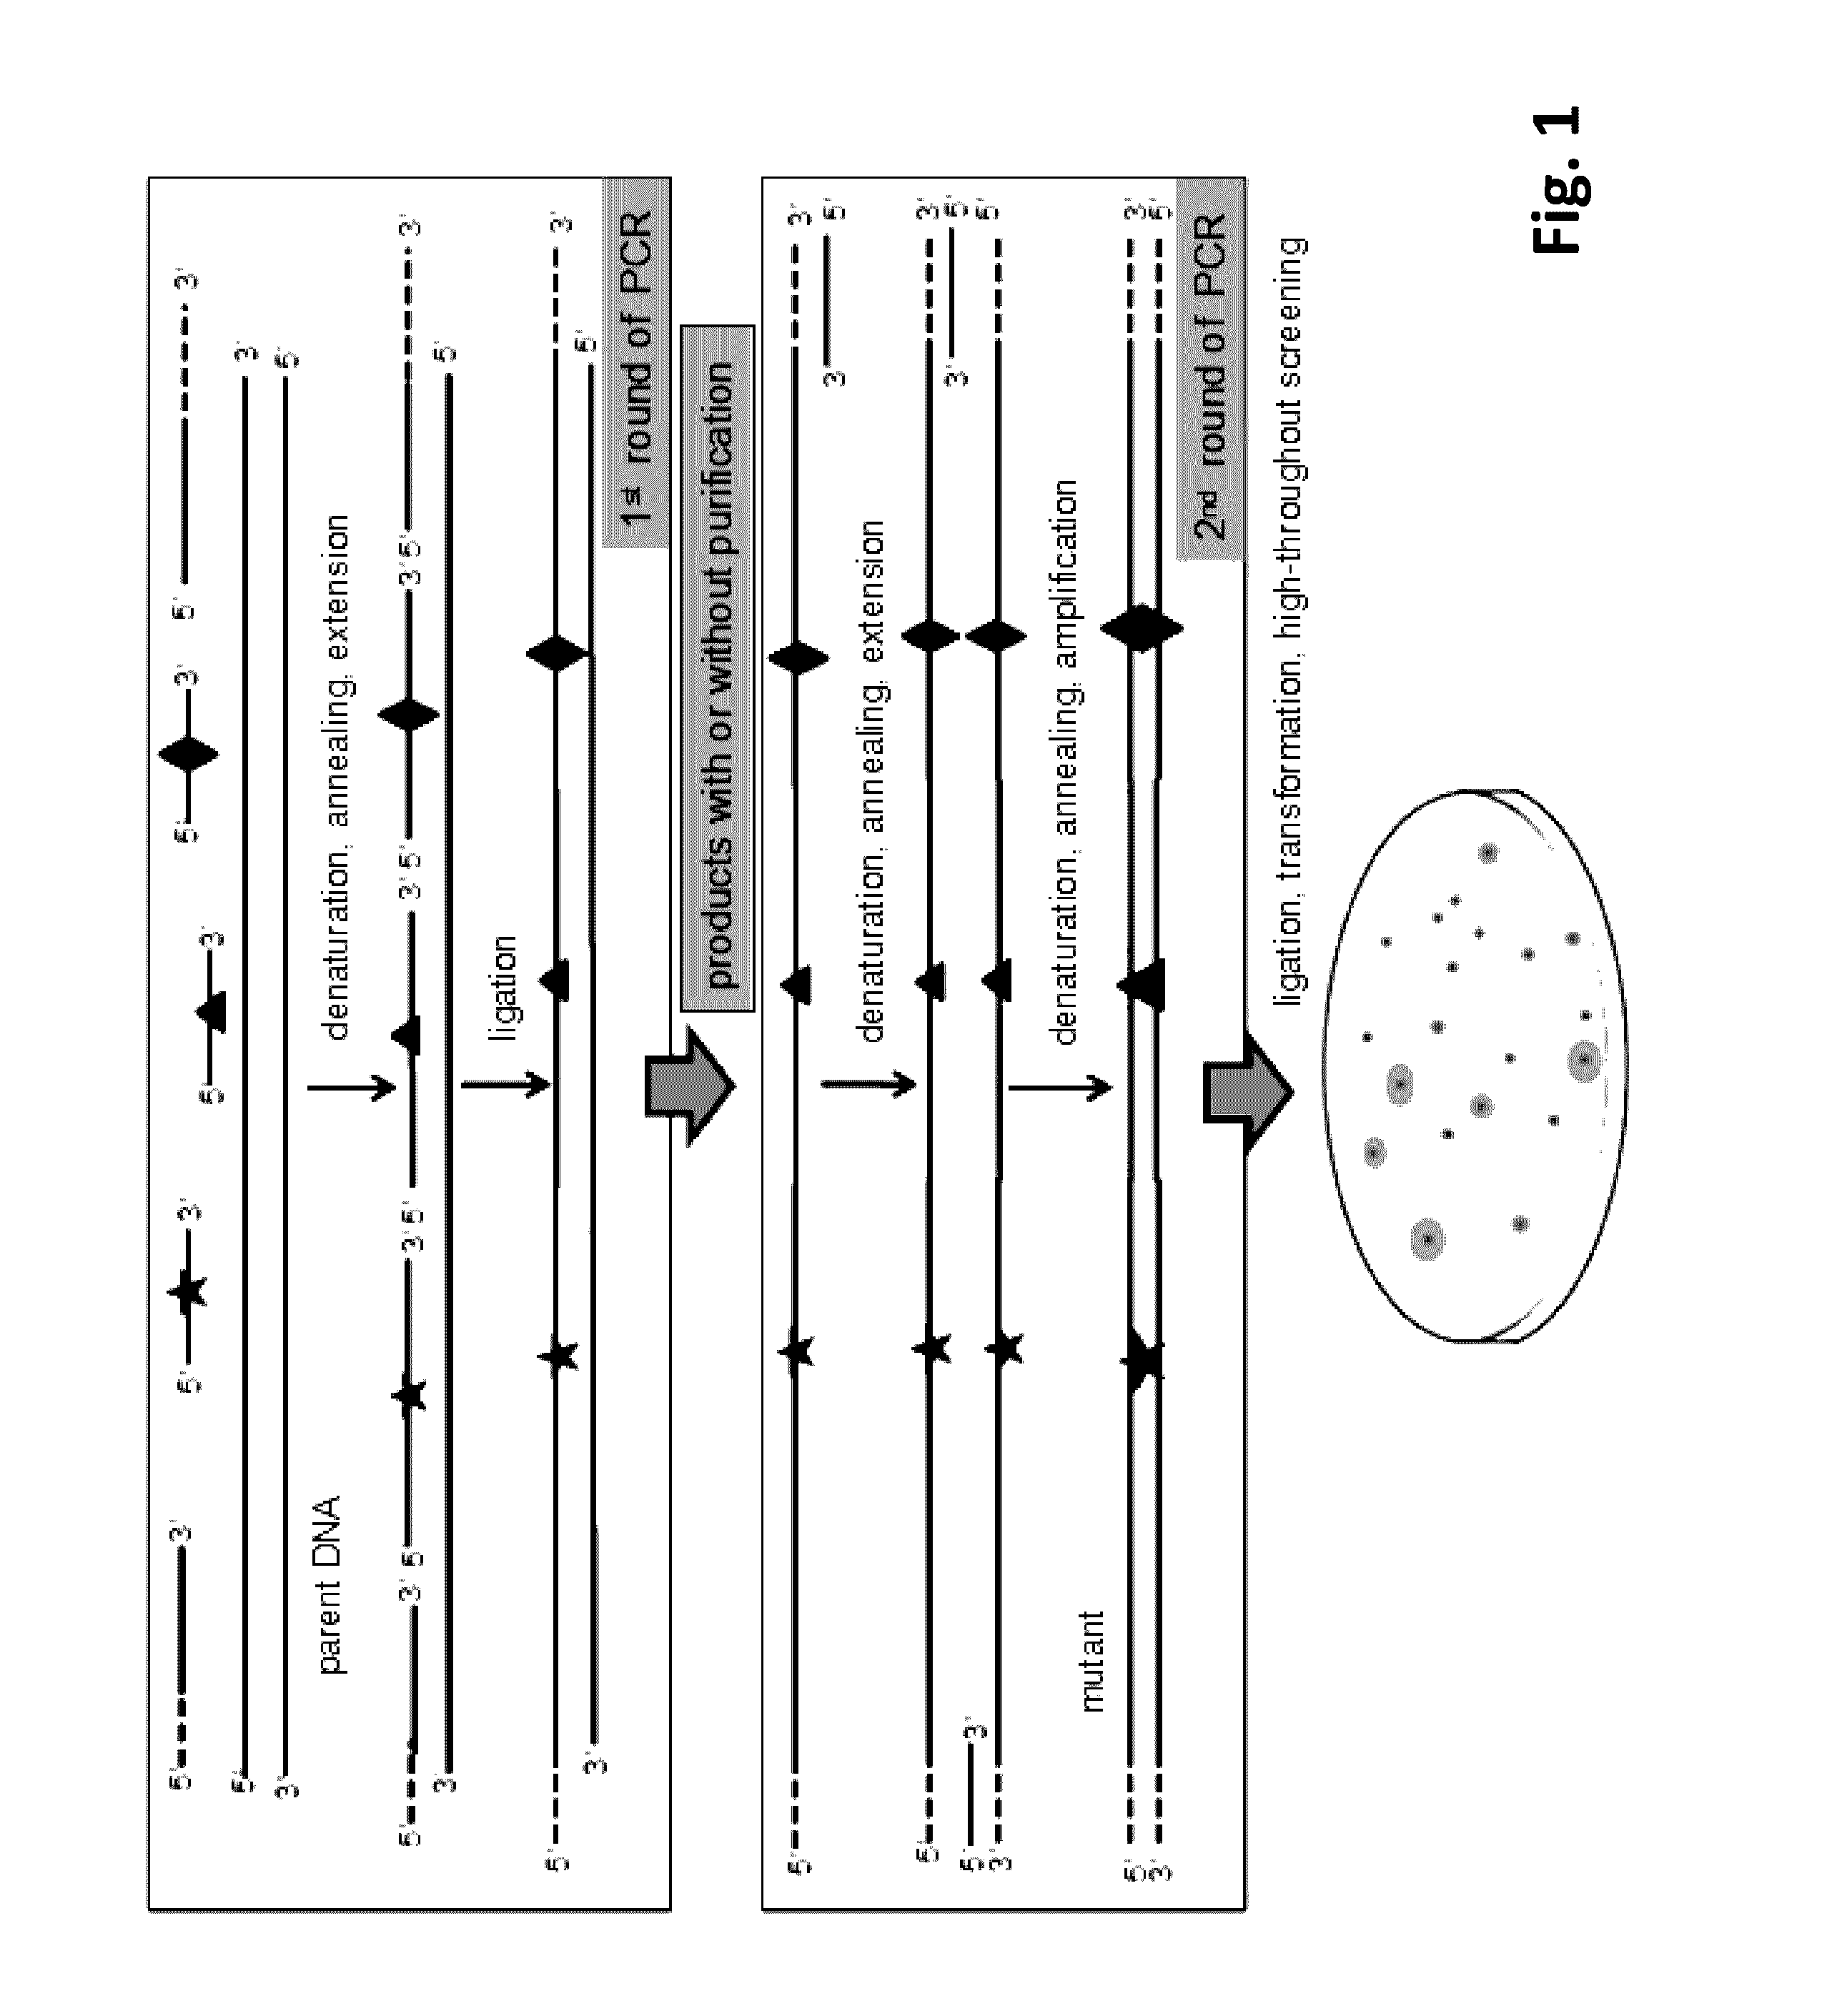 Method for Directed DNA Evolution using Combinatorial DNA Libraries